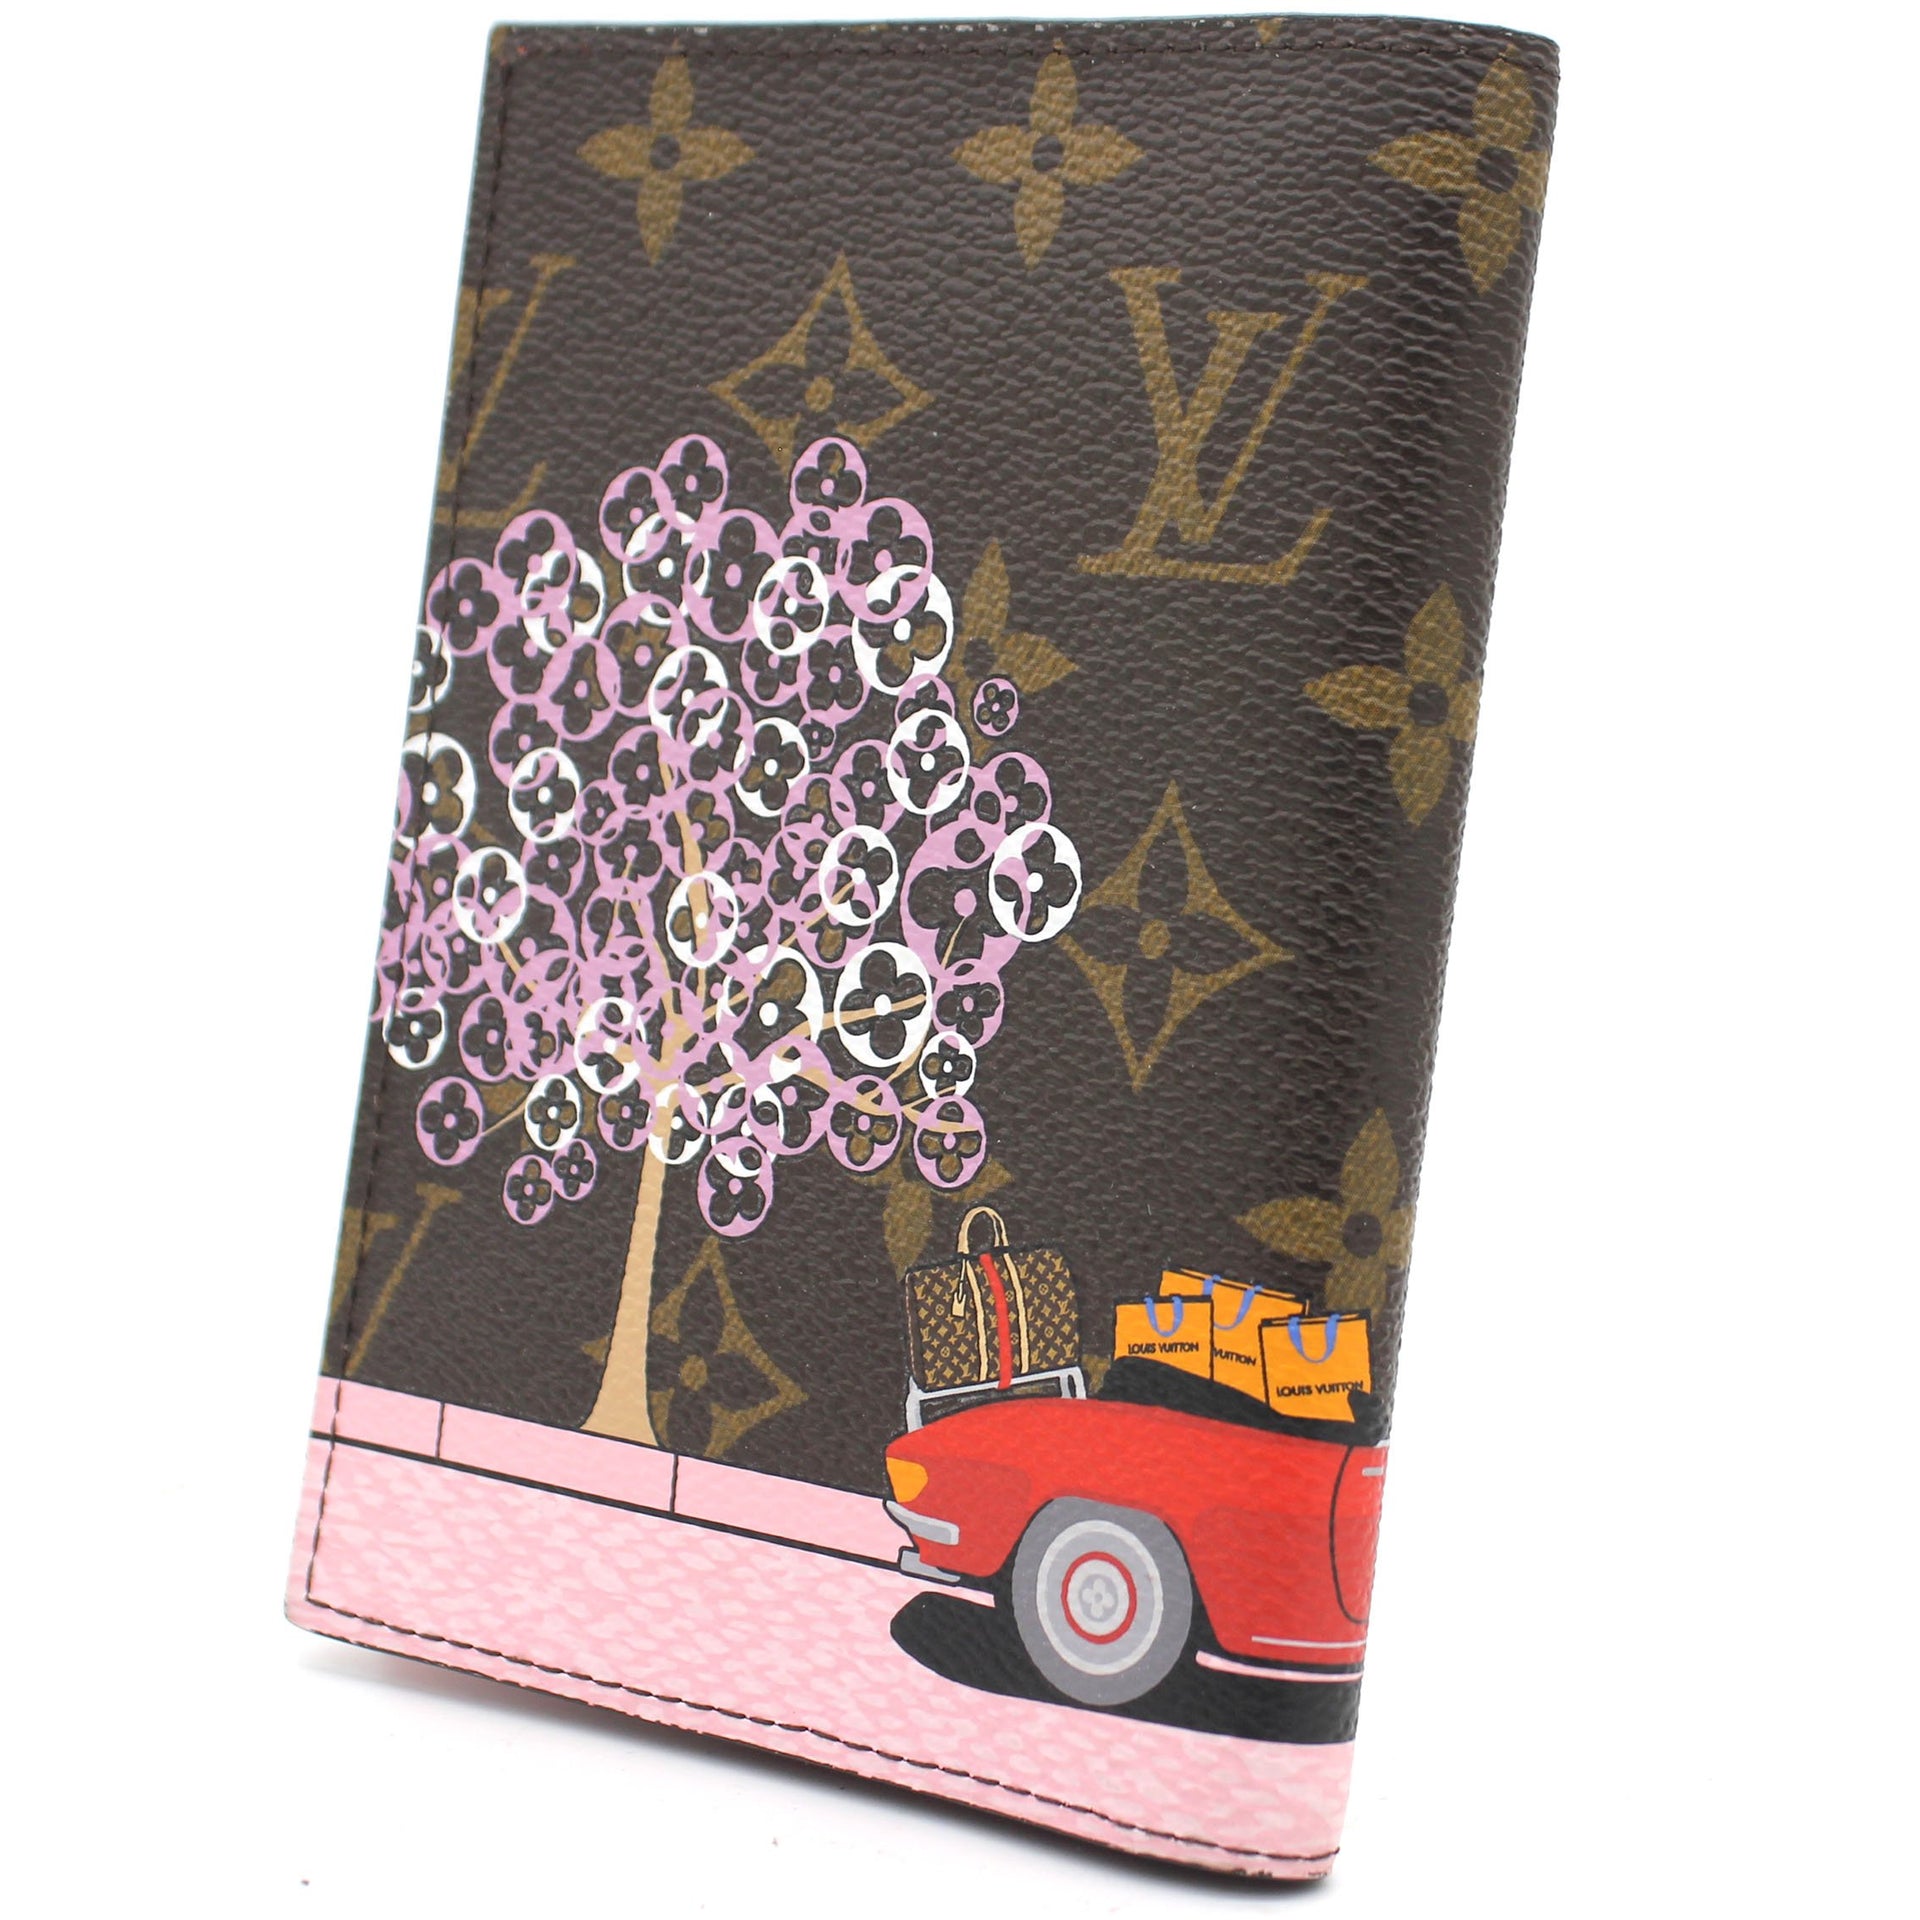 New in Box Louis Vuitton Limited Edition Paris Passport Cover at